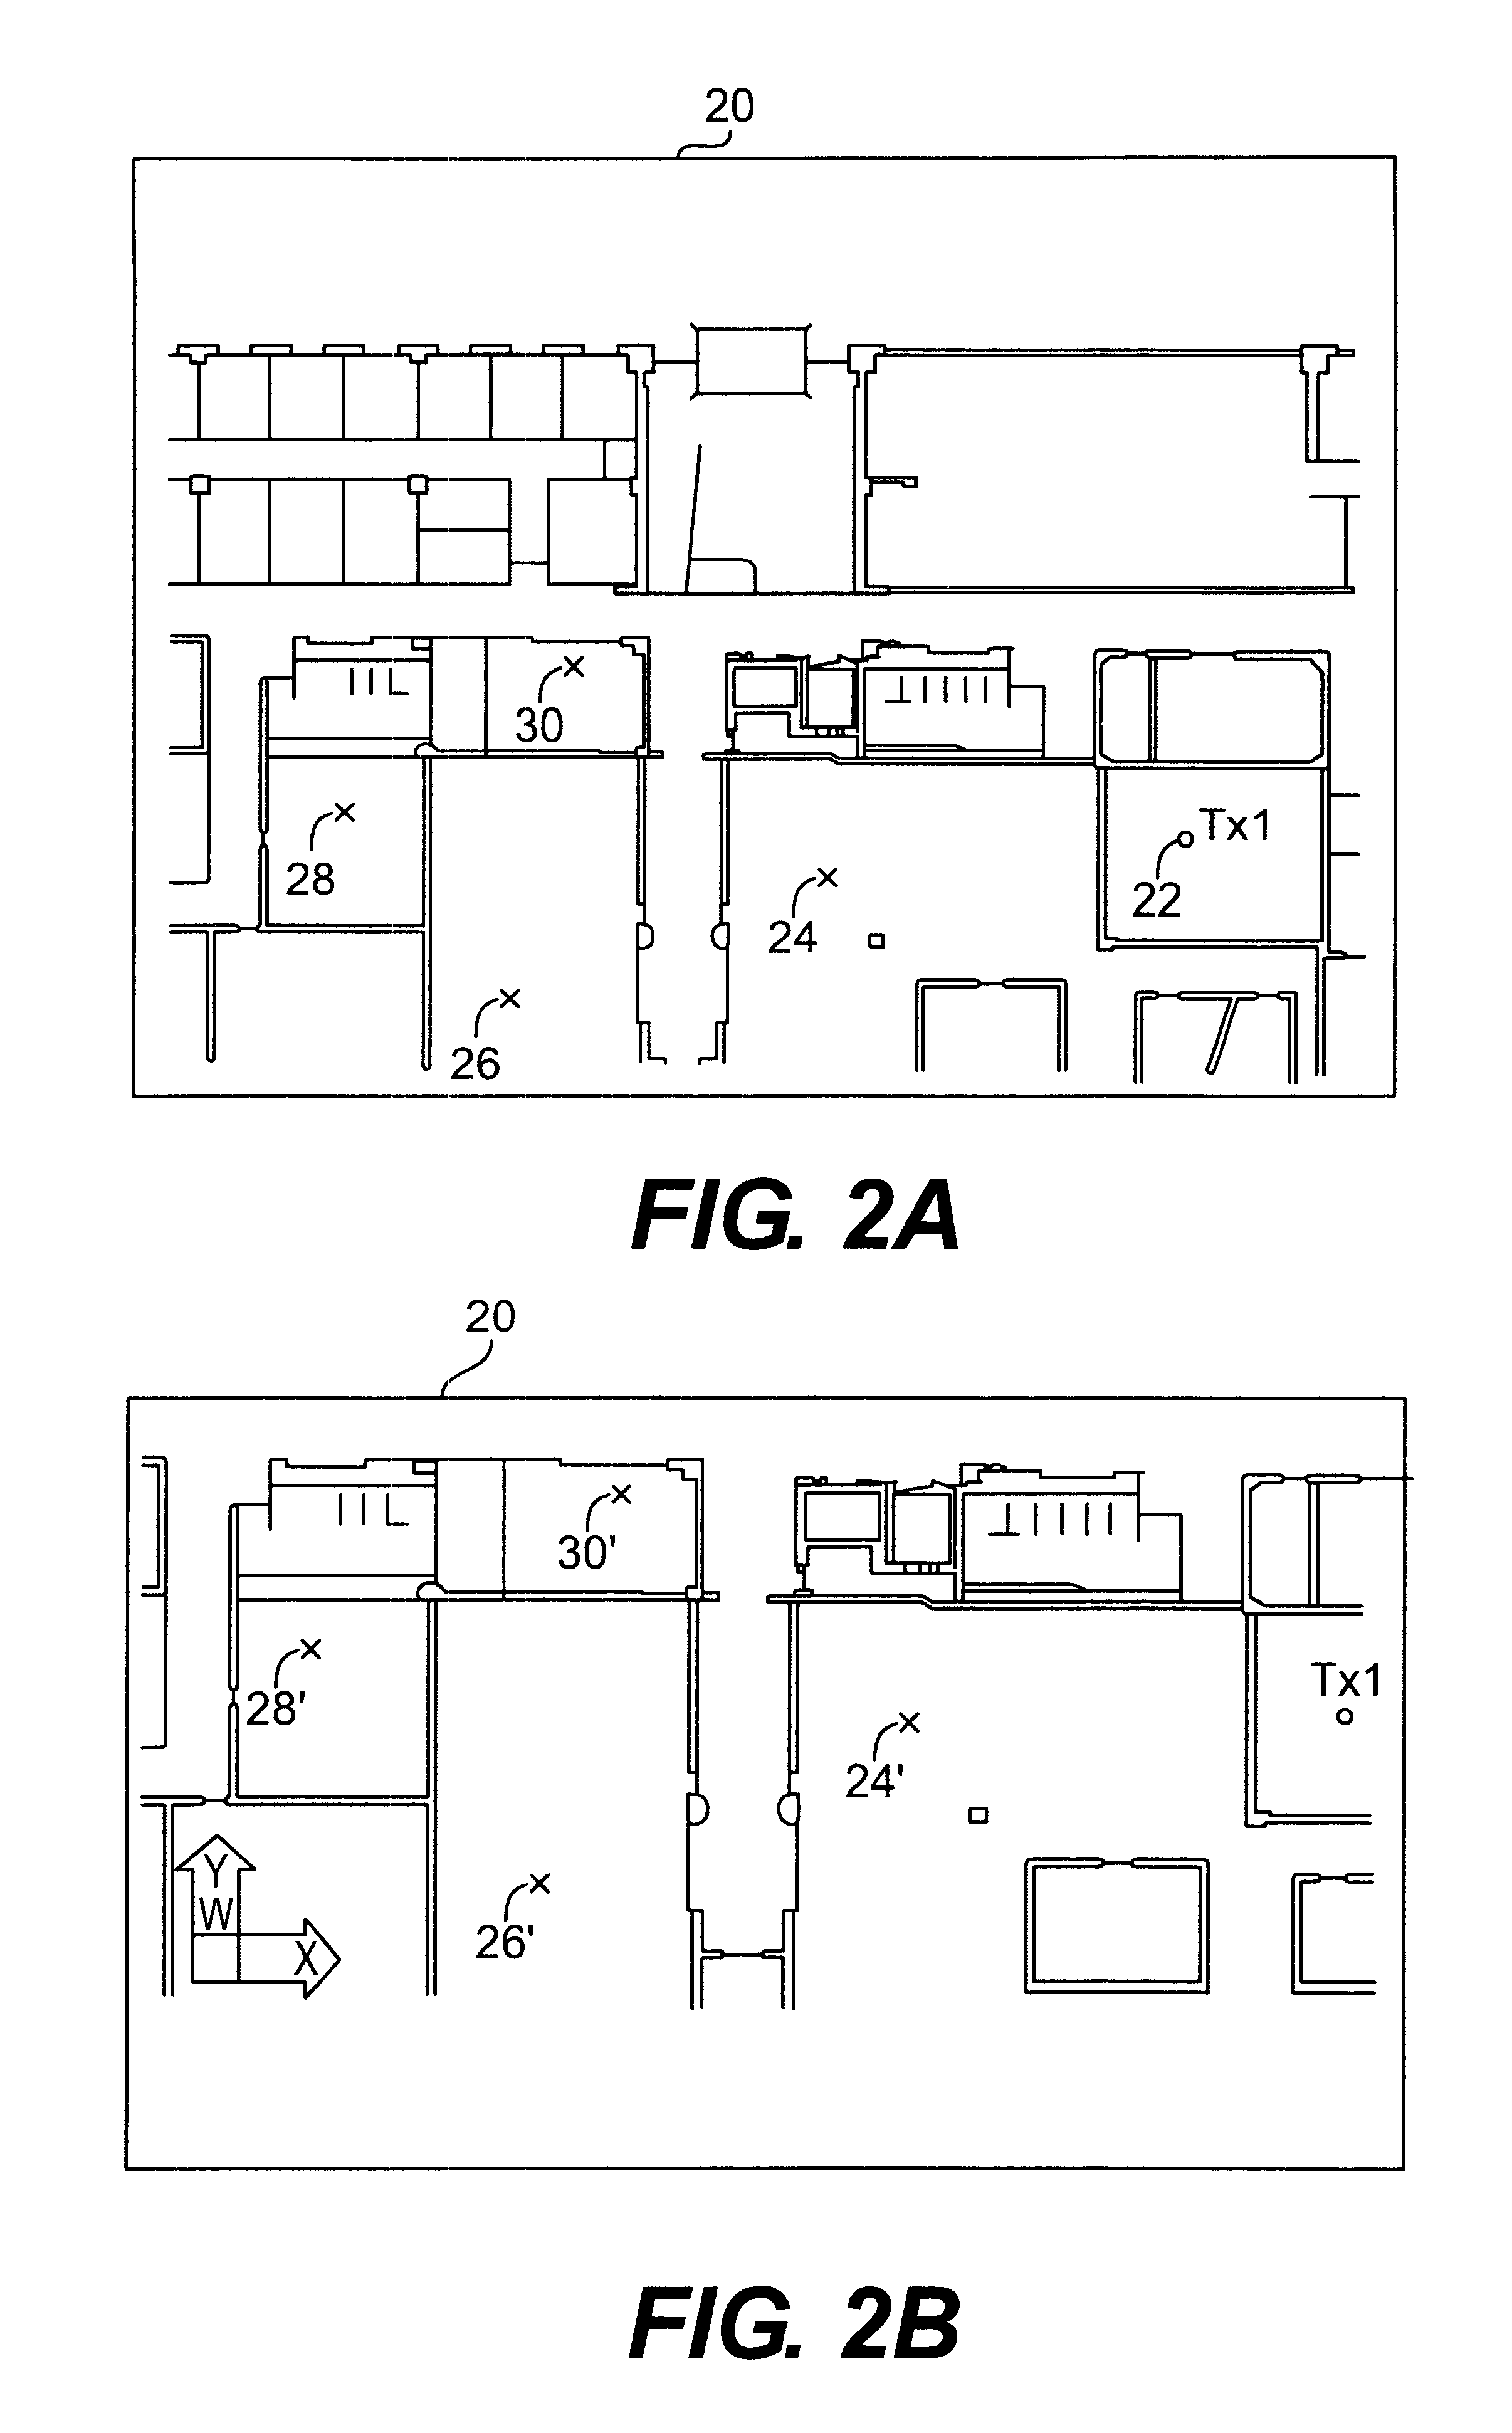 System for creating a computer model and measurement database of a wireless communication network